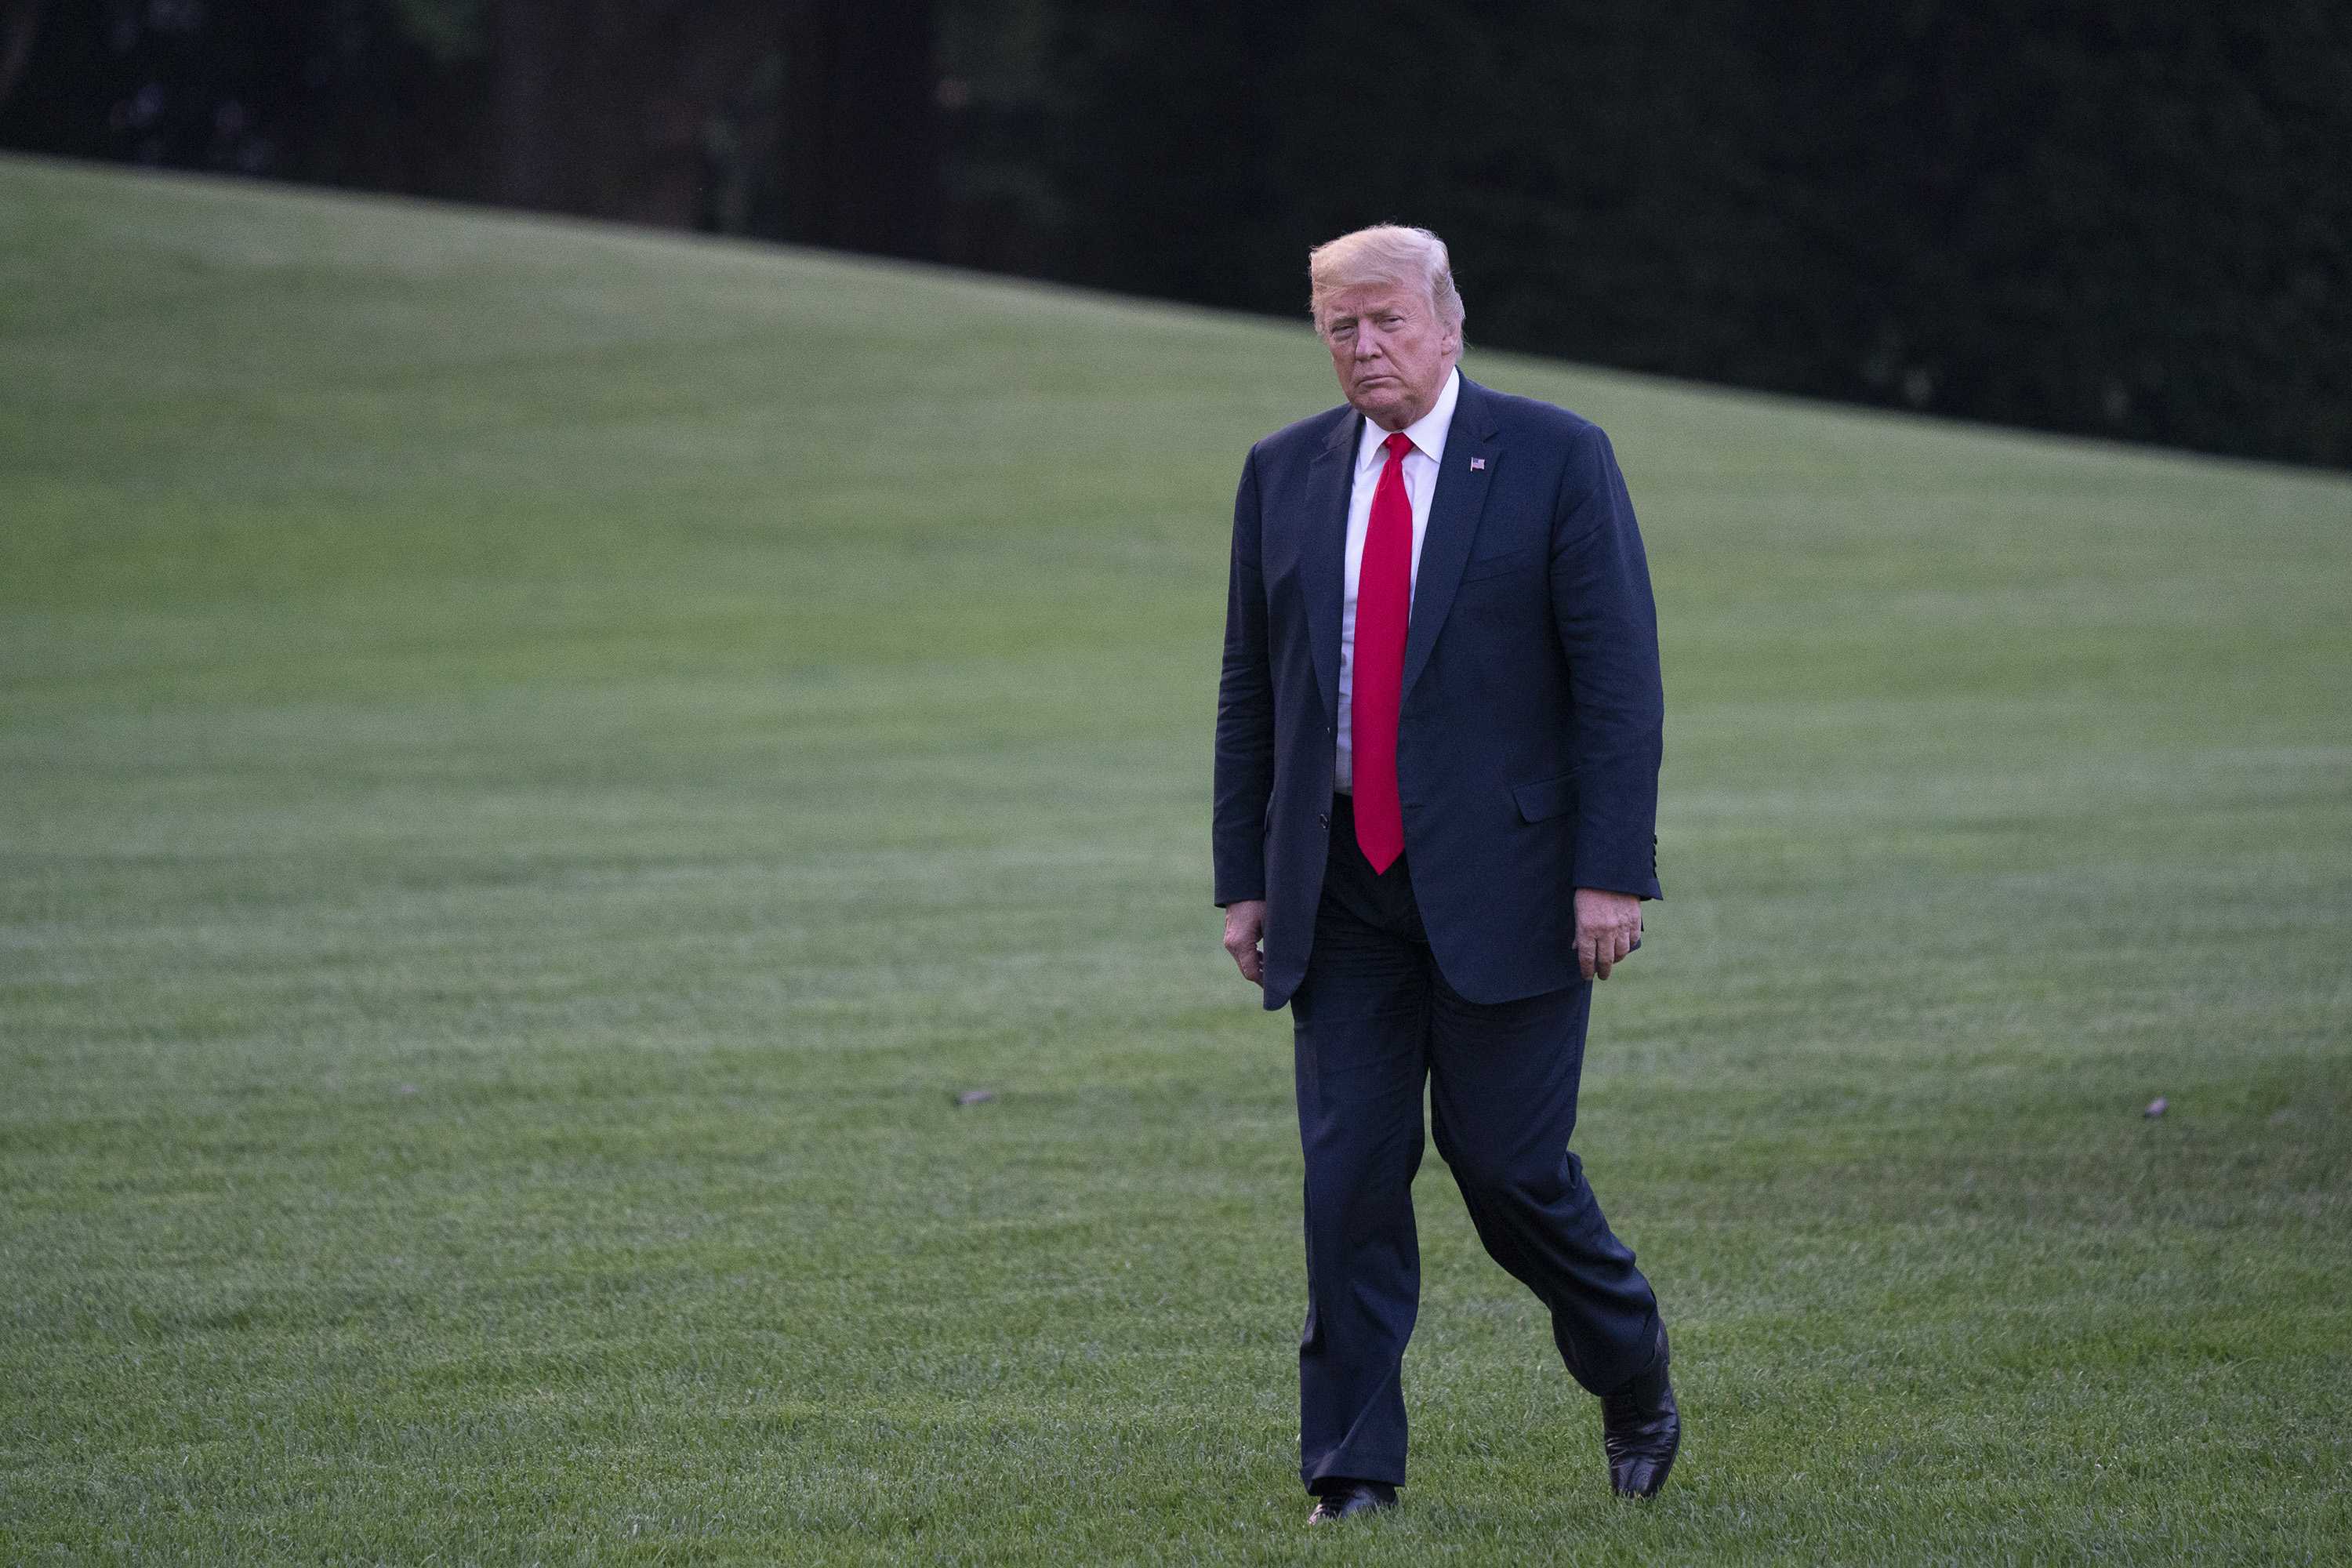 President Donald J. Trump returns to the White House on July 26, 2018 in Washington, DC. (Pool—Getty Images)